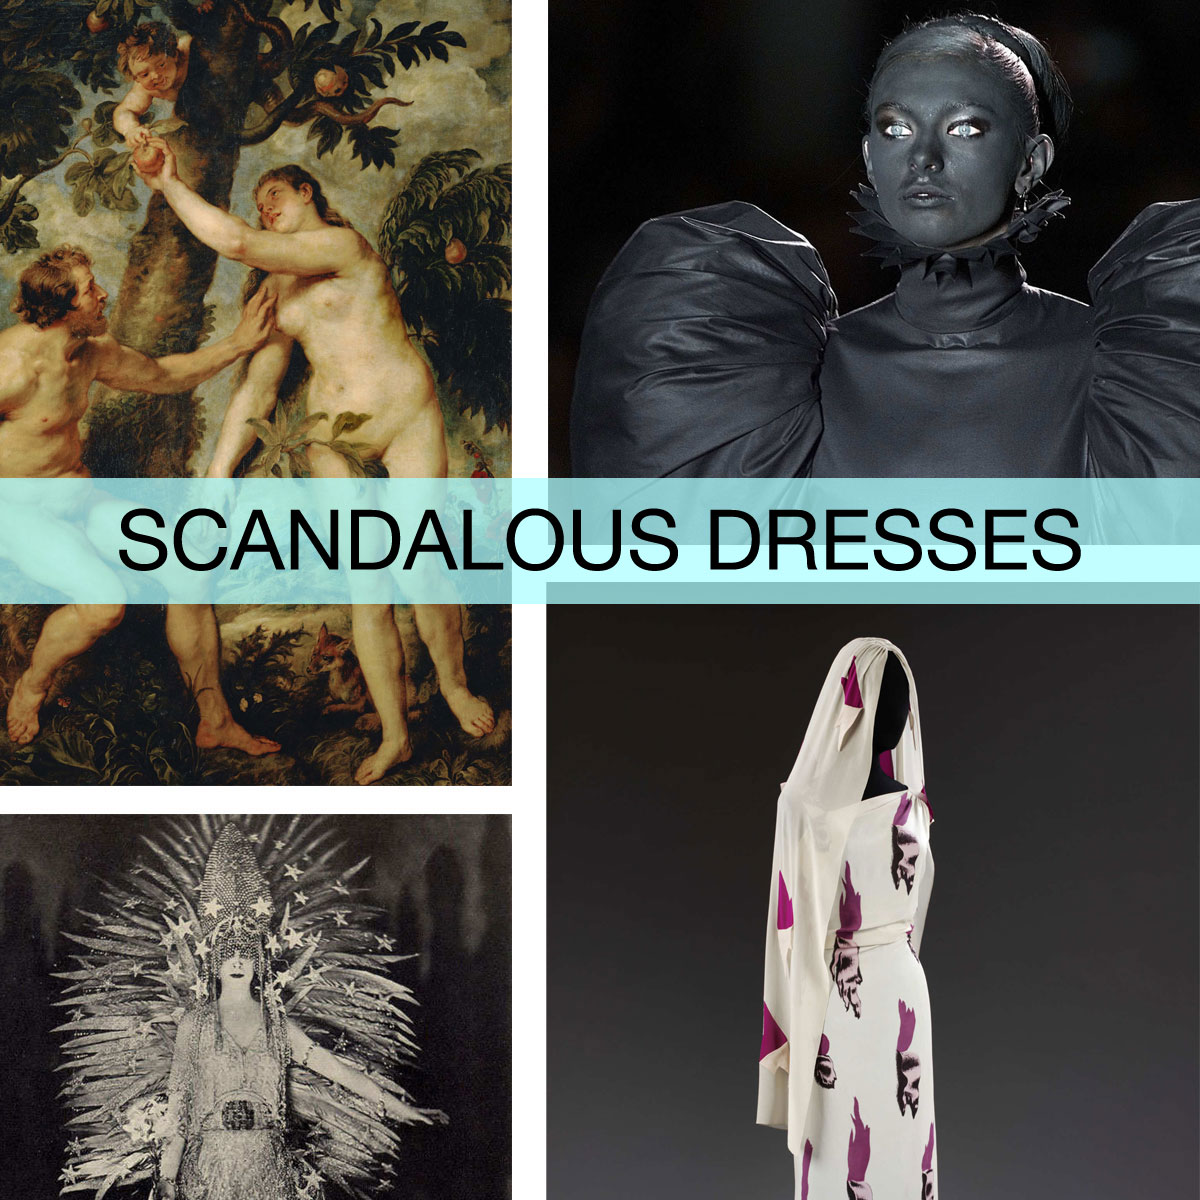   The 50 Most Scandalous Dresses in History  for  New York Magazine 's The Cut  August 2012 